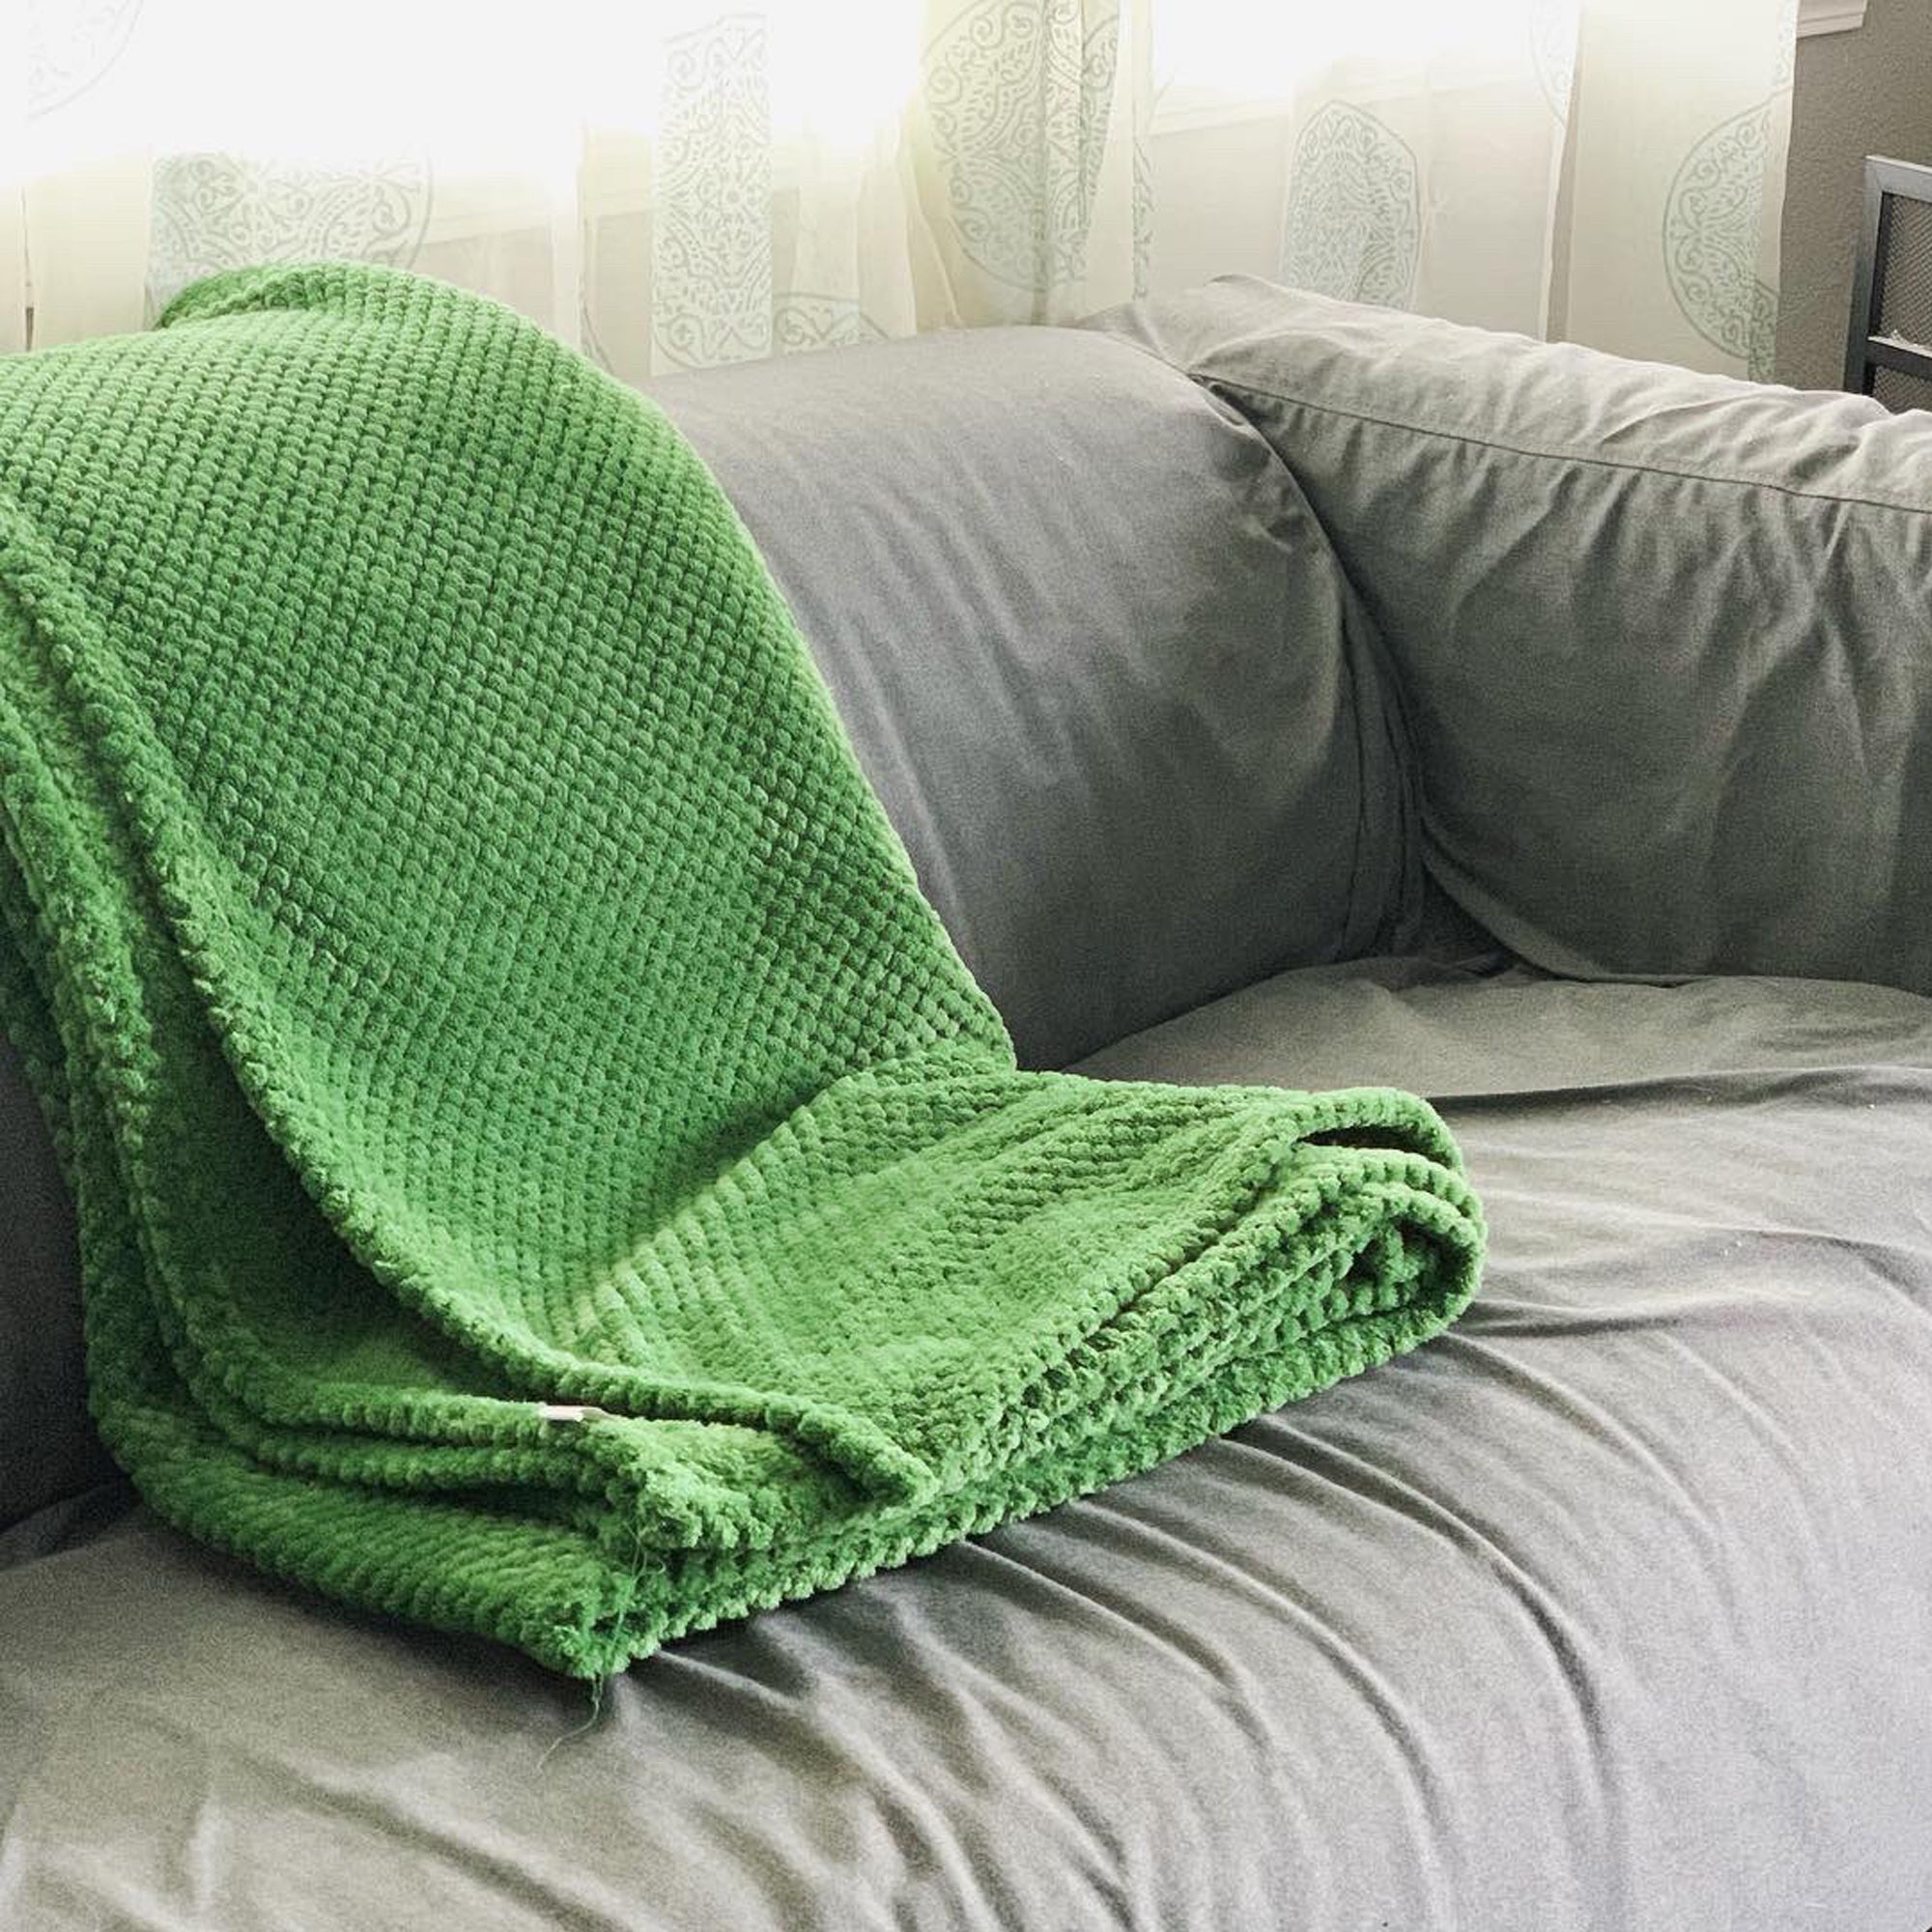 Image of a dark green color Microfiber fleece throw blanket draped over a bed and bench